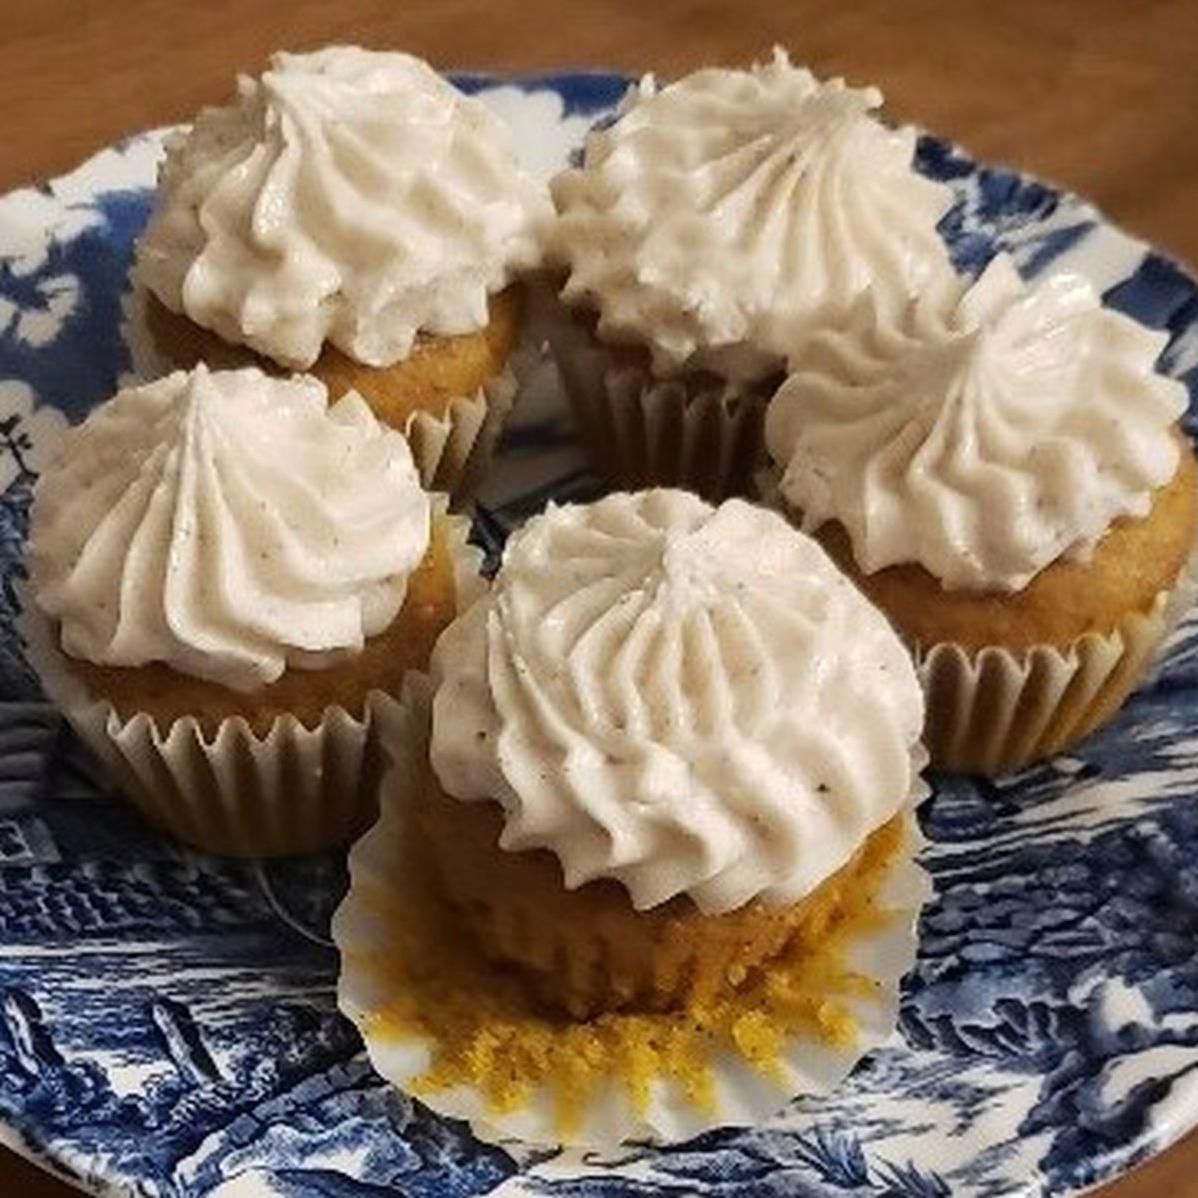  These mini cupcakes are the perfect fall treat!